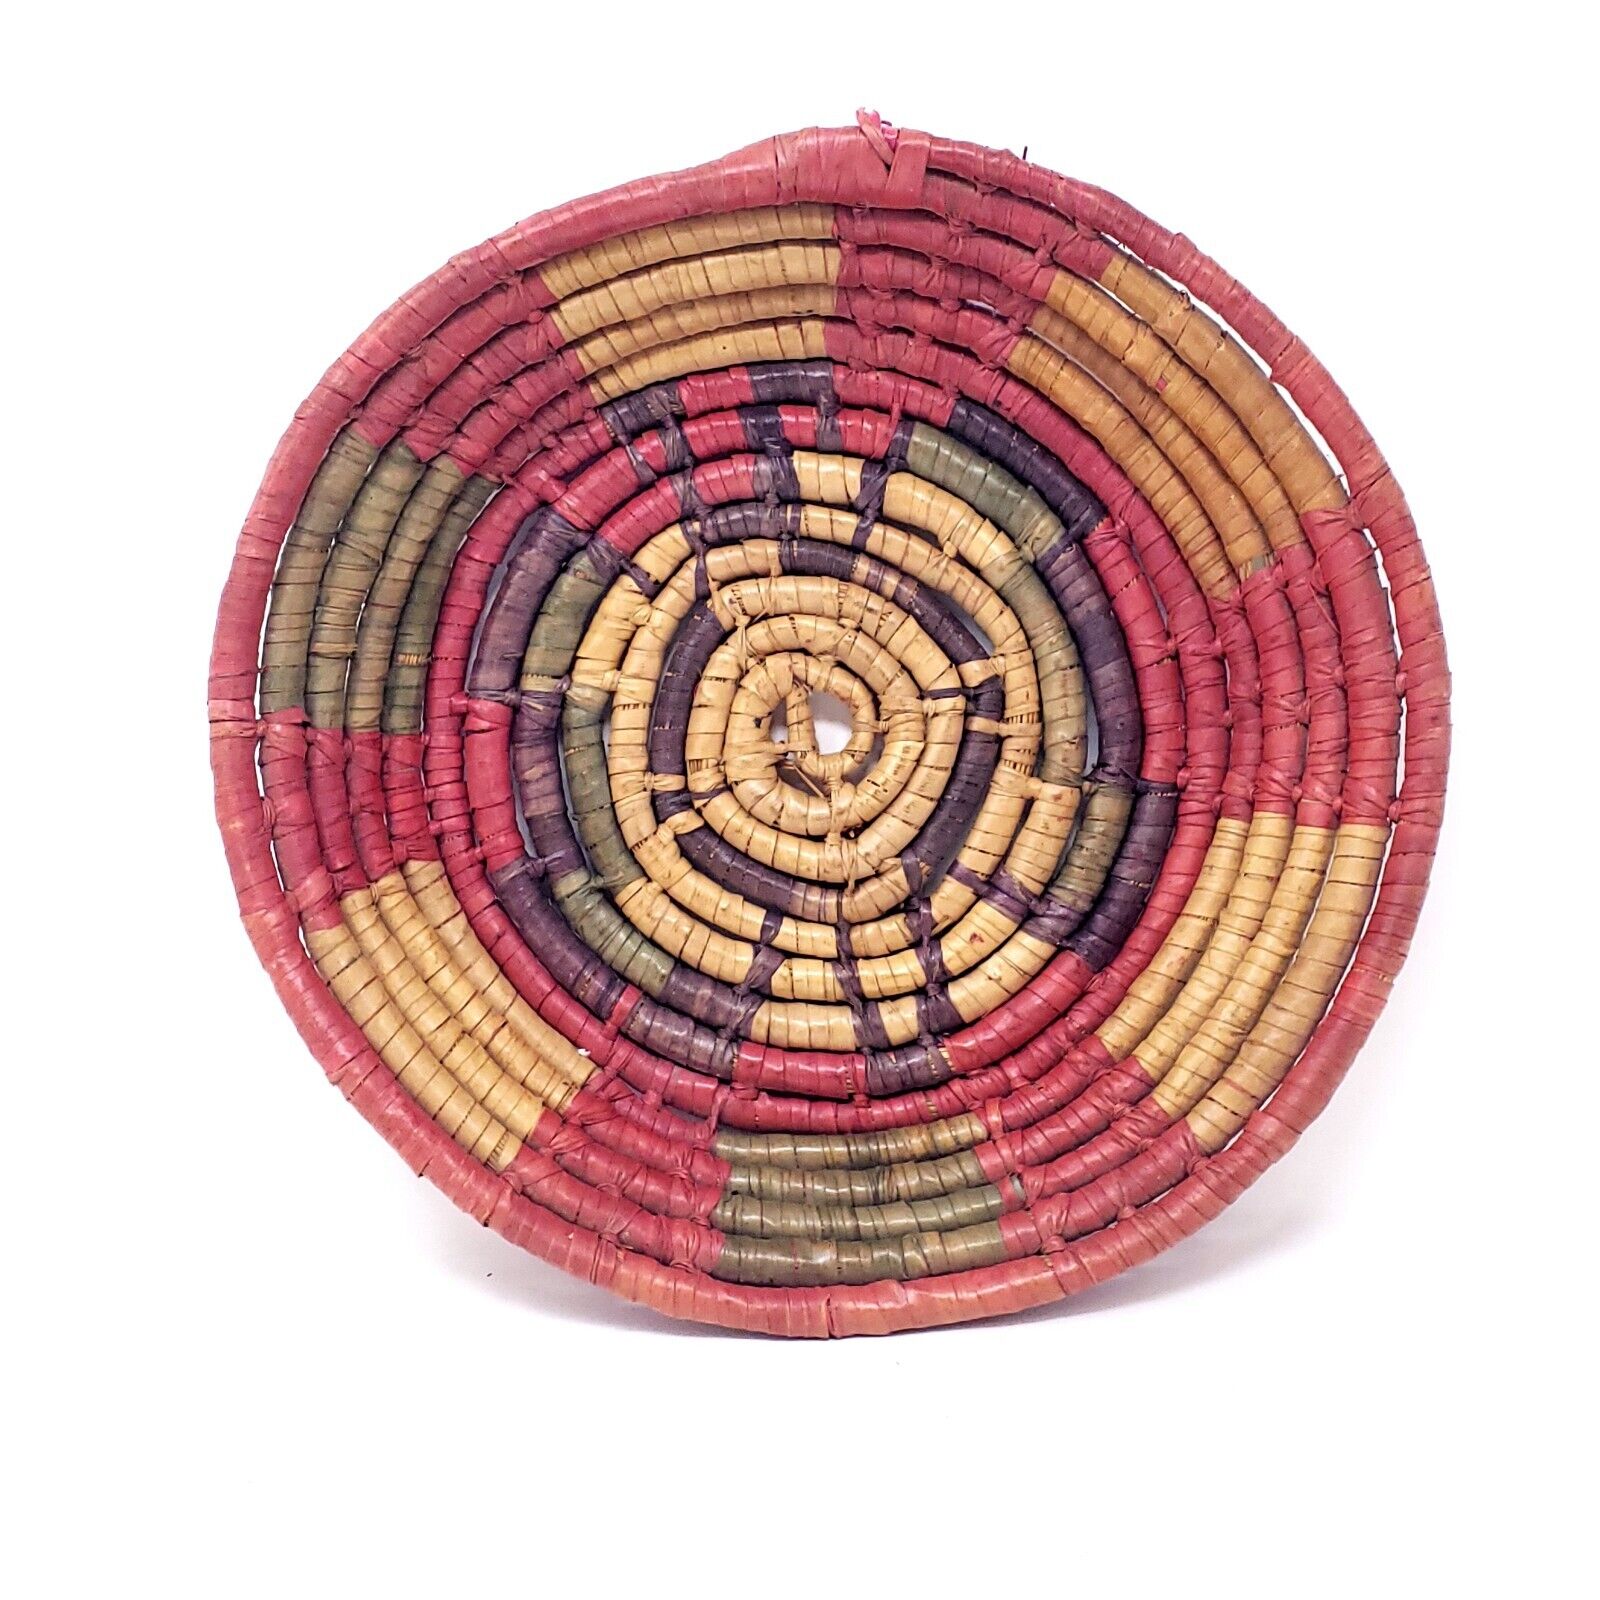 Vintage Hand Woven Coiled Southwestern Basket Bowl Wall Decor  10”